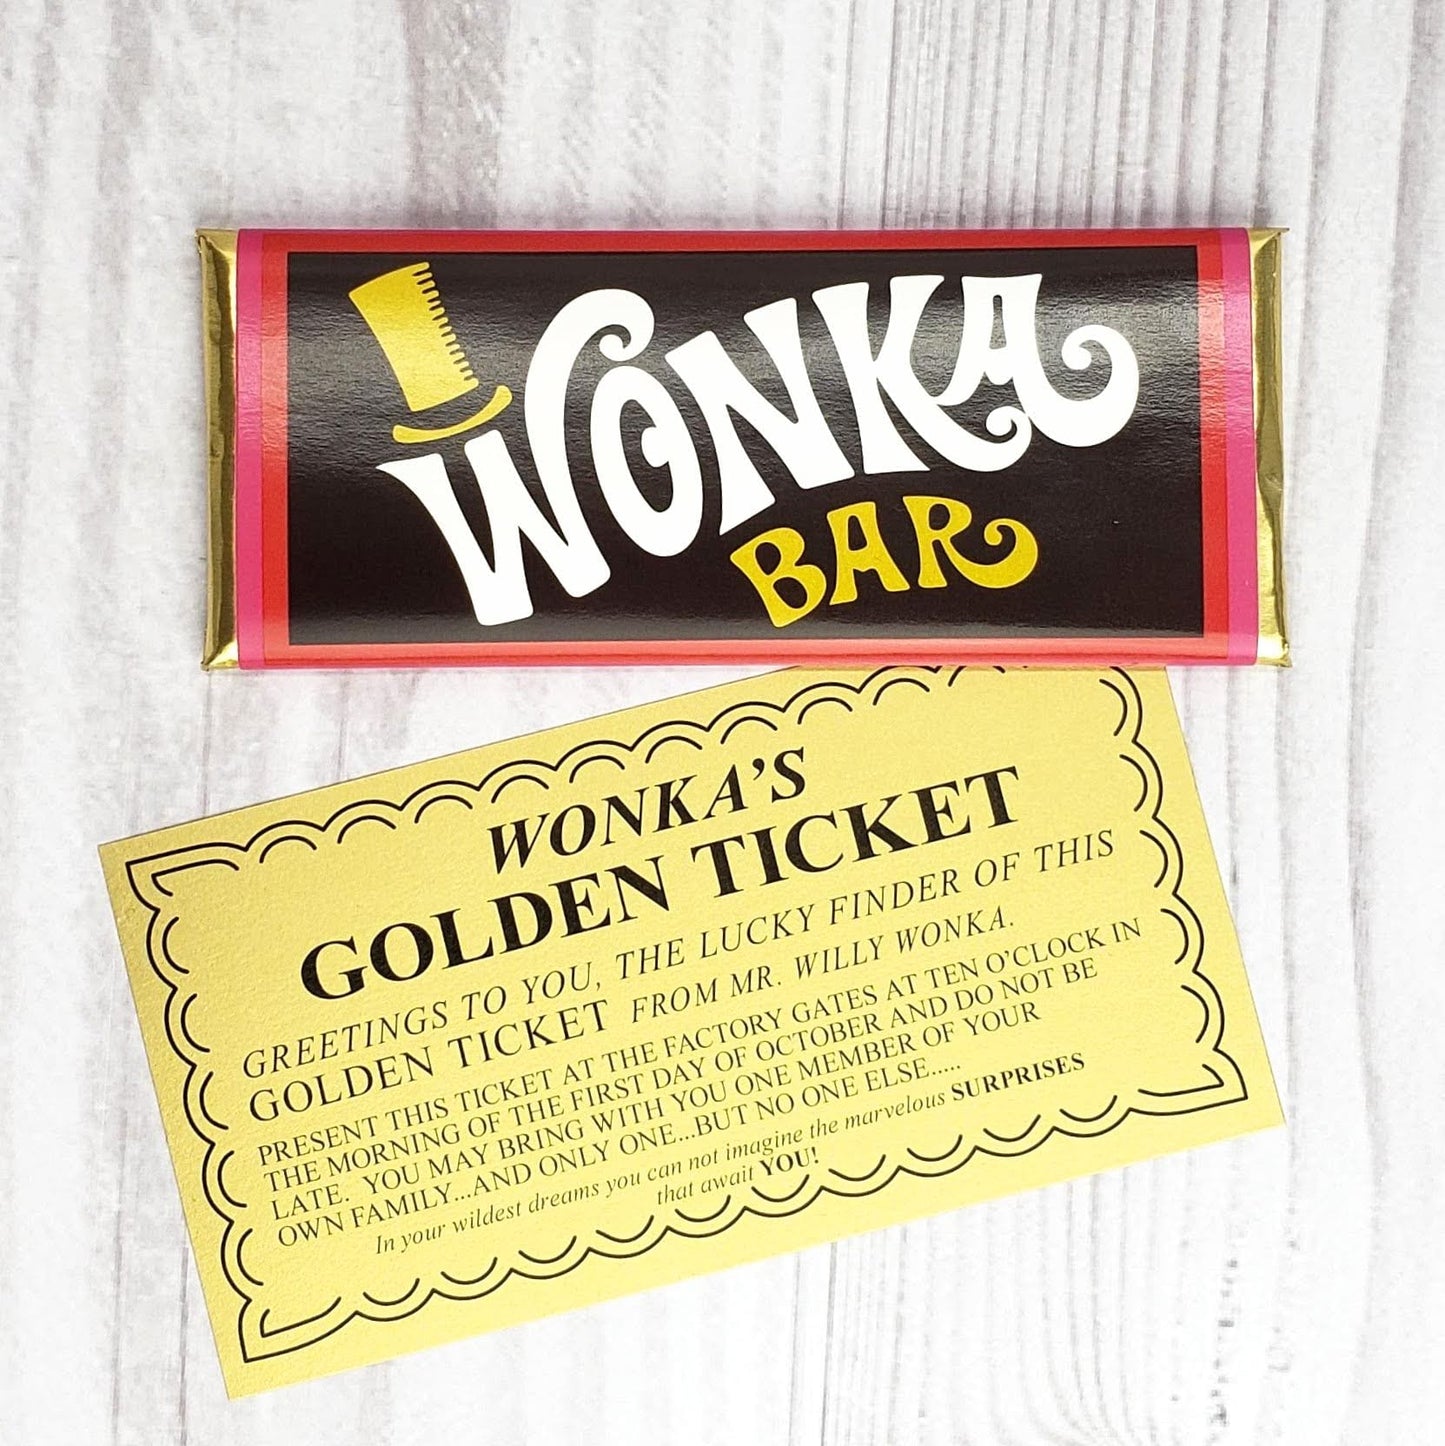 Set of 2 - Wonka Bar Wrapper and Foil with Golden Ticket - Non-Personalized (candy not included) Wonka Bar Wrapper and Foil with Golden Ticket Party Favors wonka